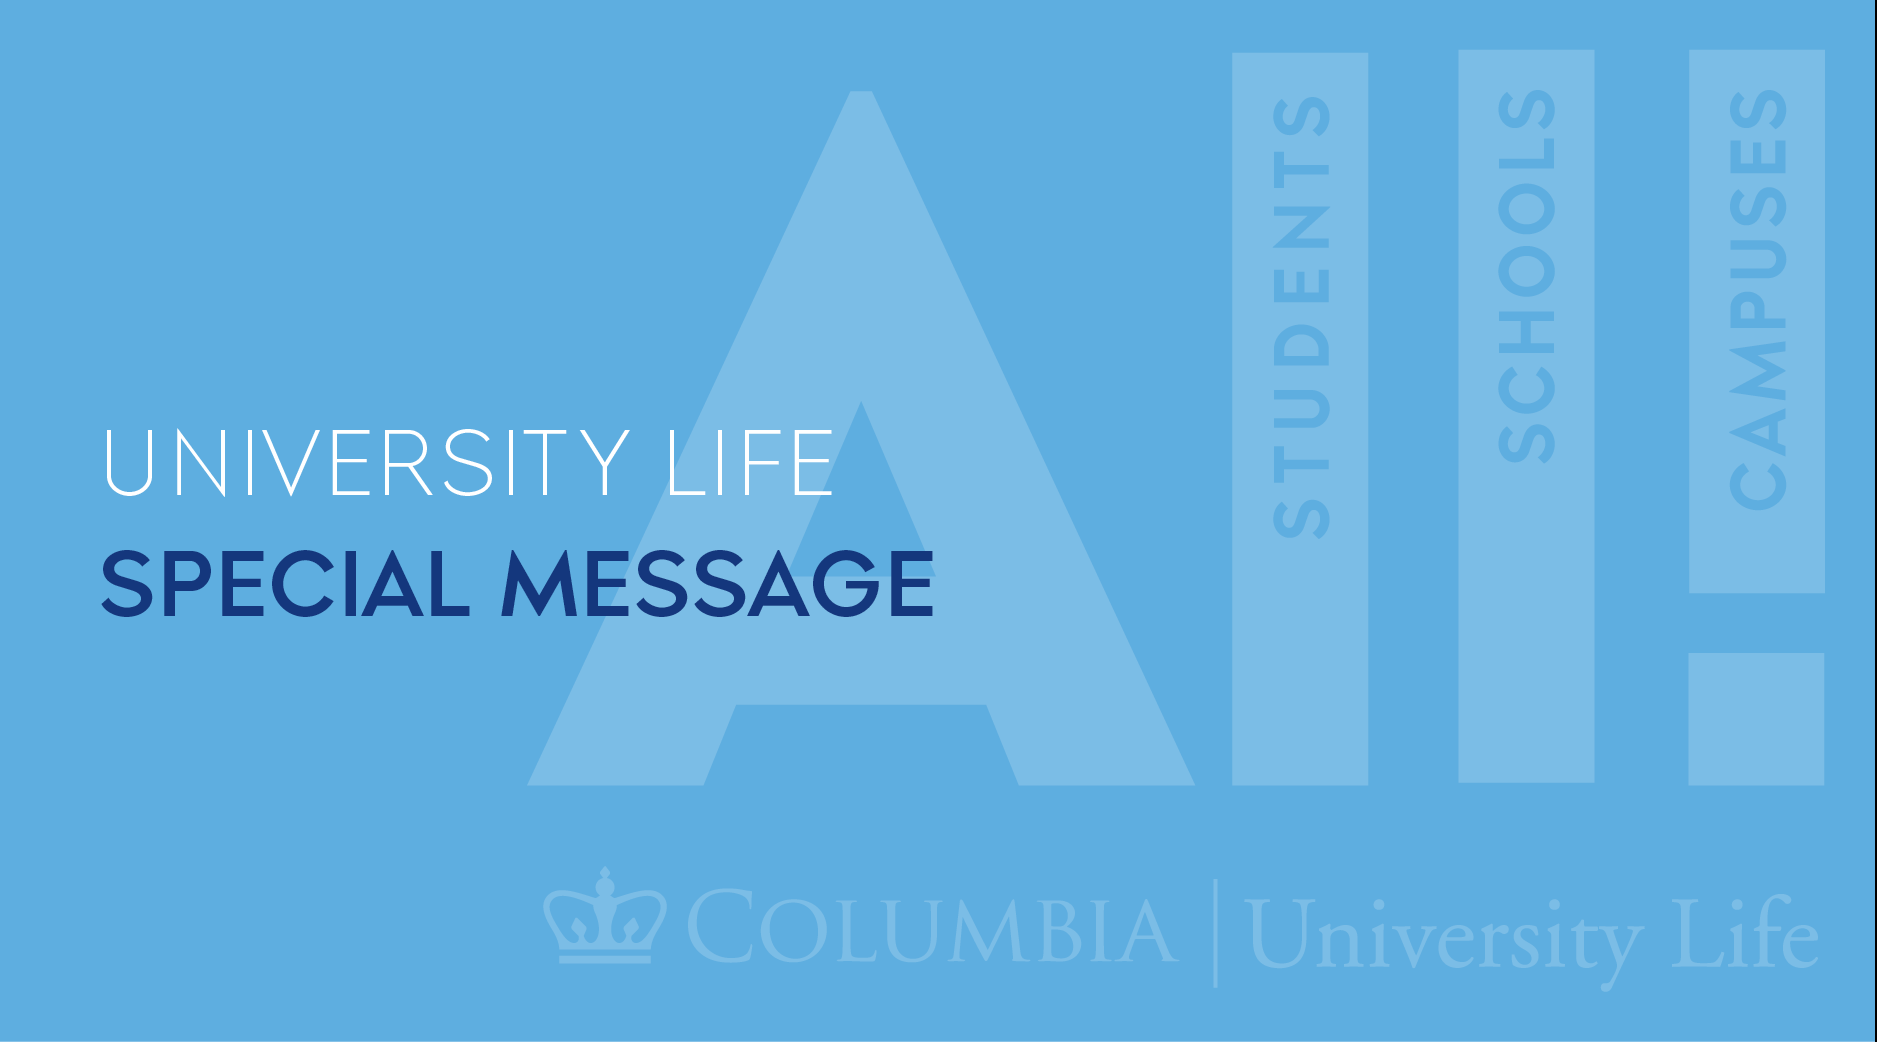 A light blue background with the University Life logo overlaid in transparent white letters. The text reads "University Life Special Message"